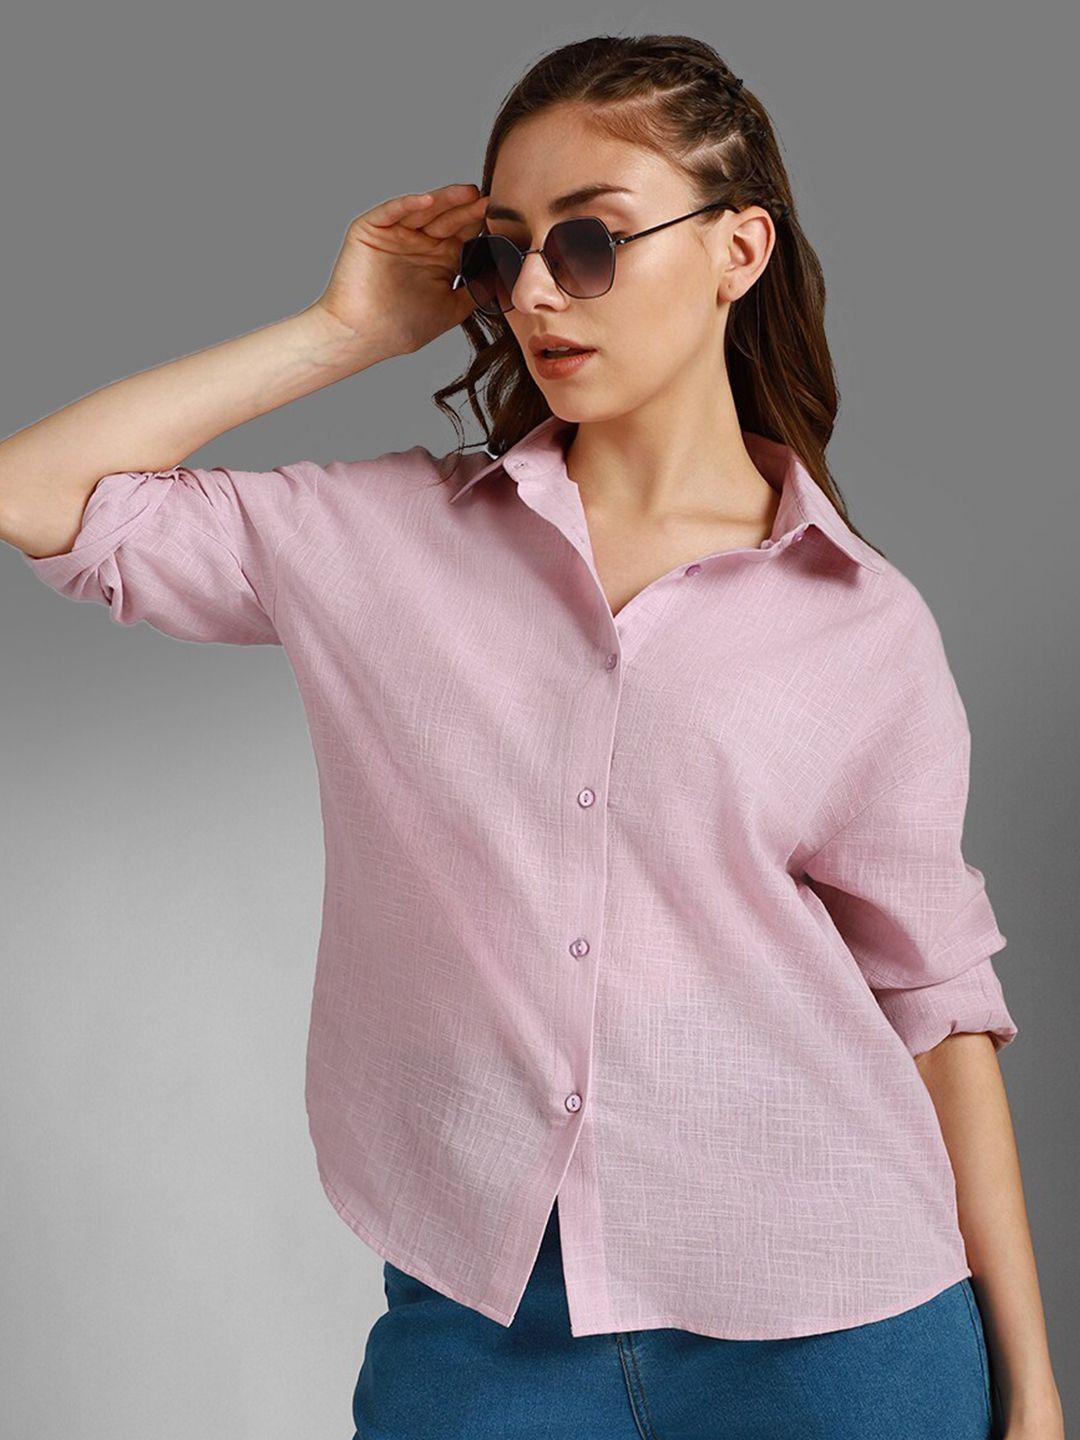 high star classic boxy spread collar long sleeves cotton casual shirt